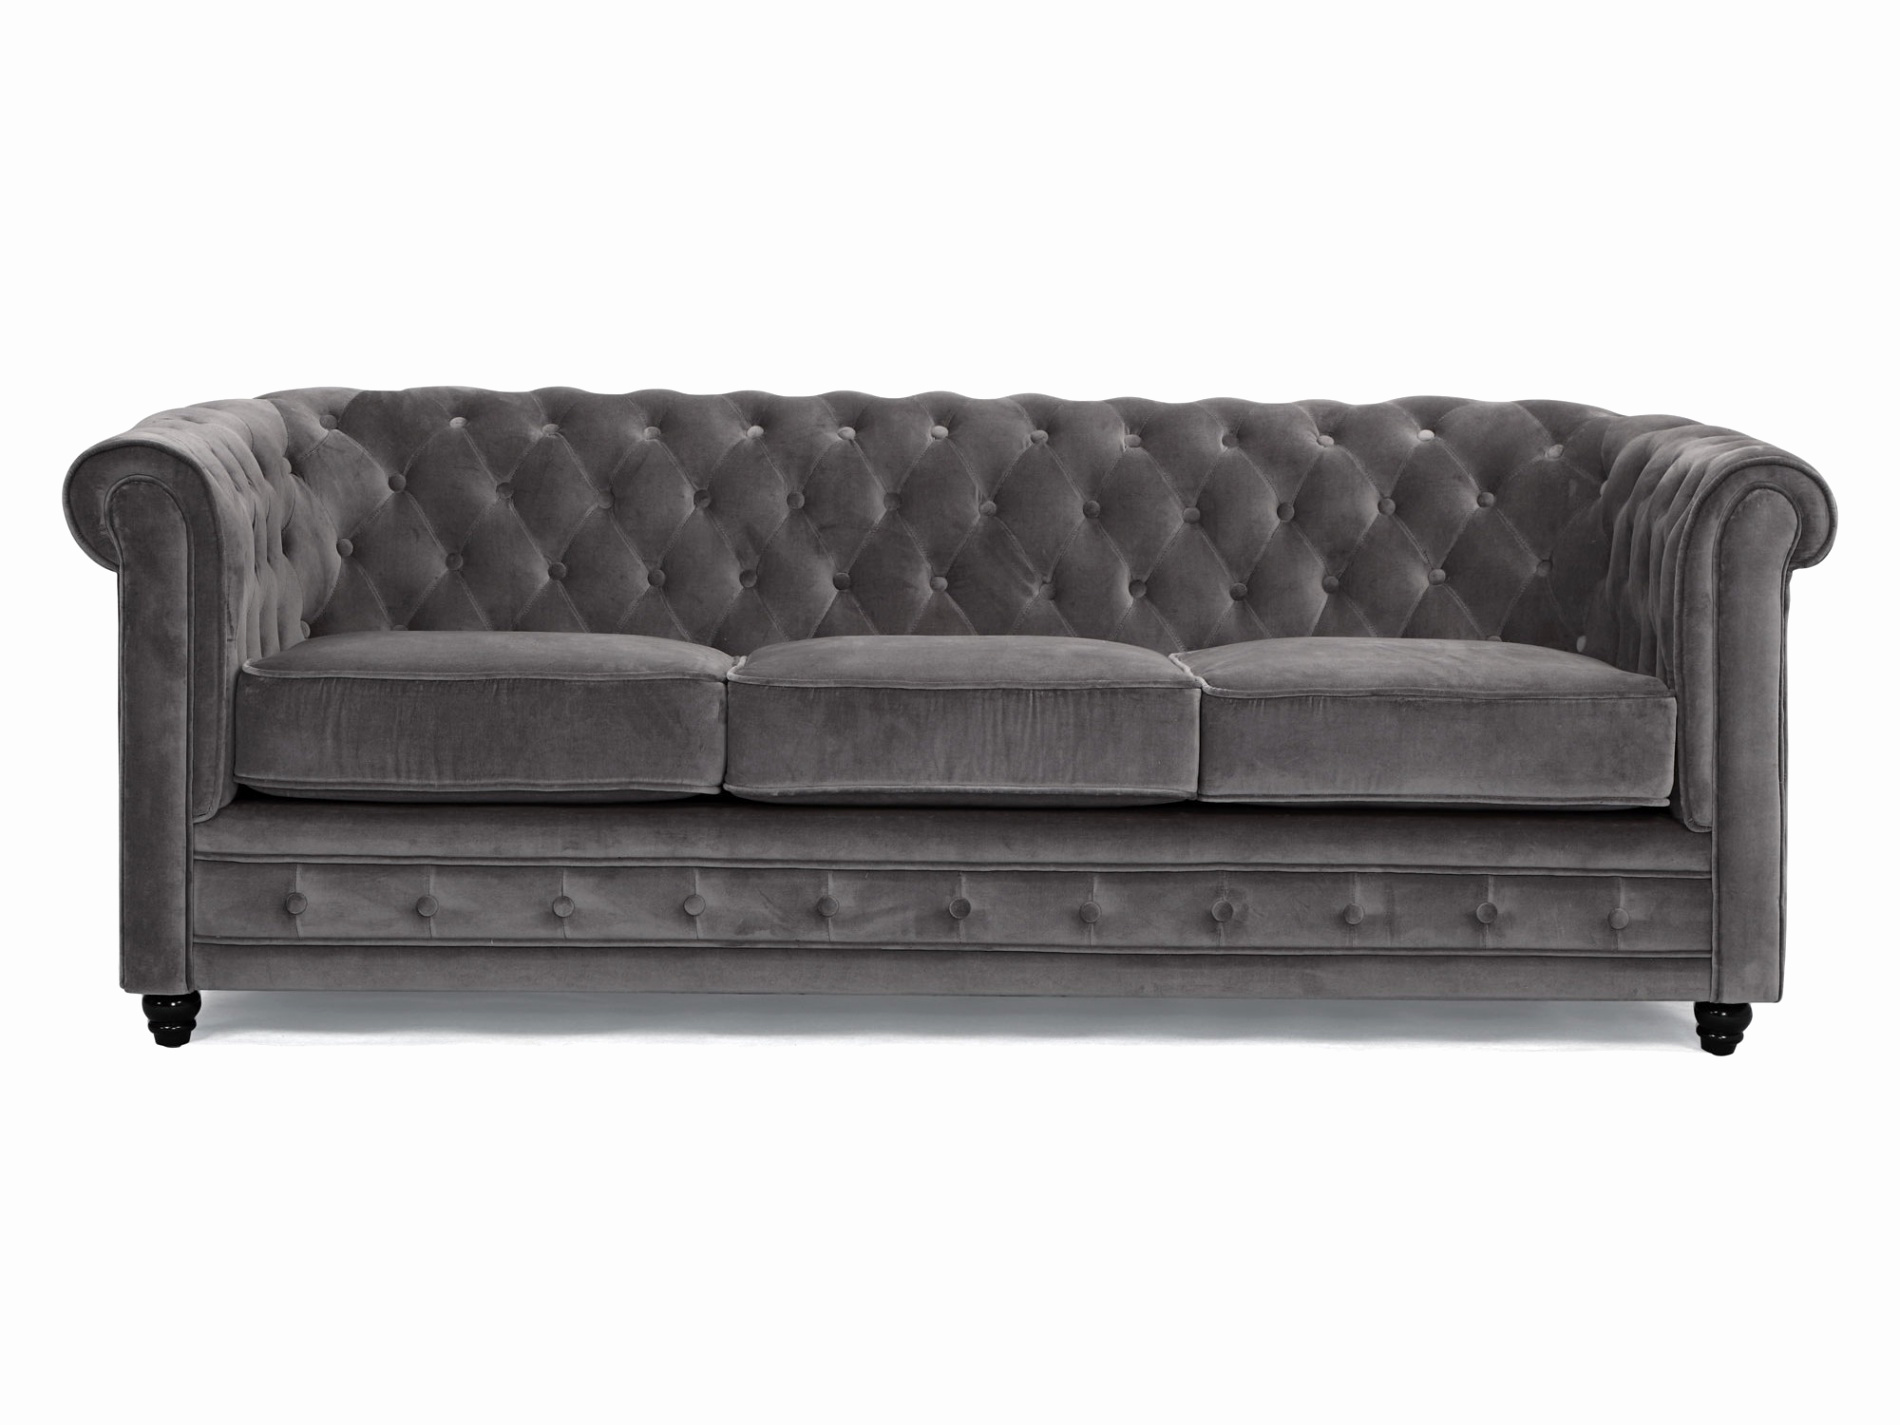 canape chesterfield d angle beau canape 2 places gris clair salon 2 canapes beau canapes cuir of canape chesterfield d angle